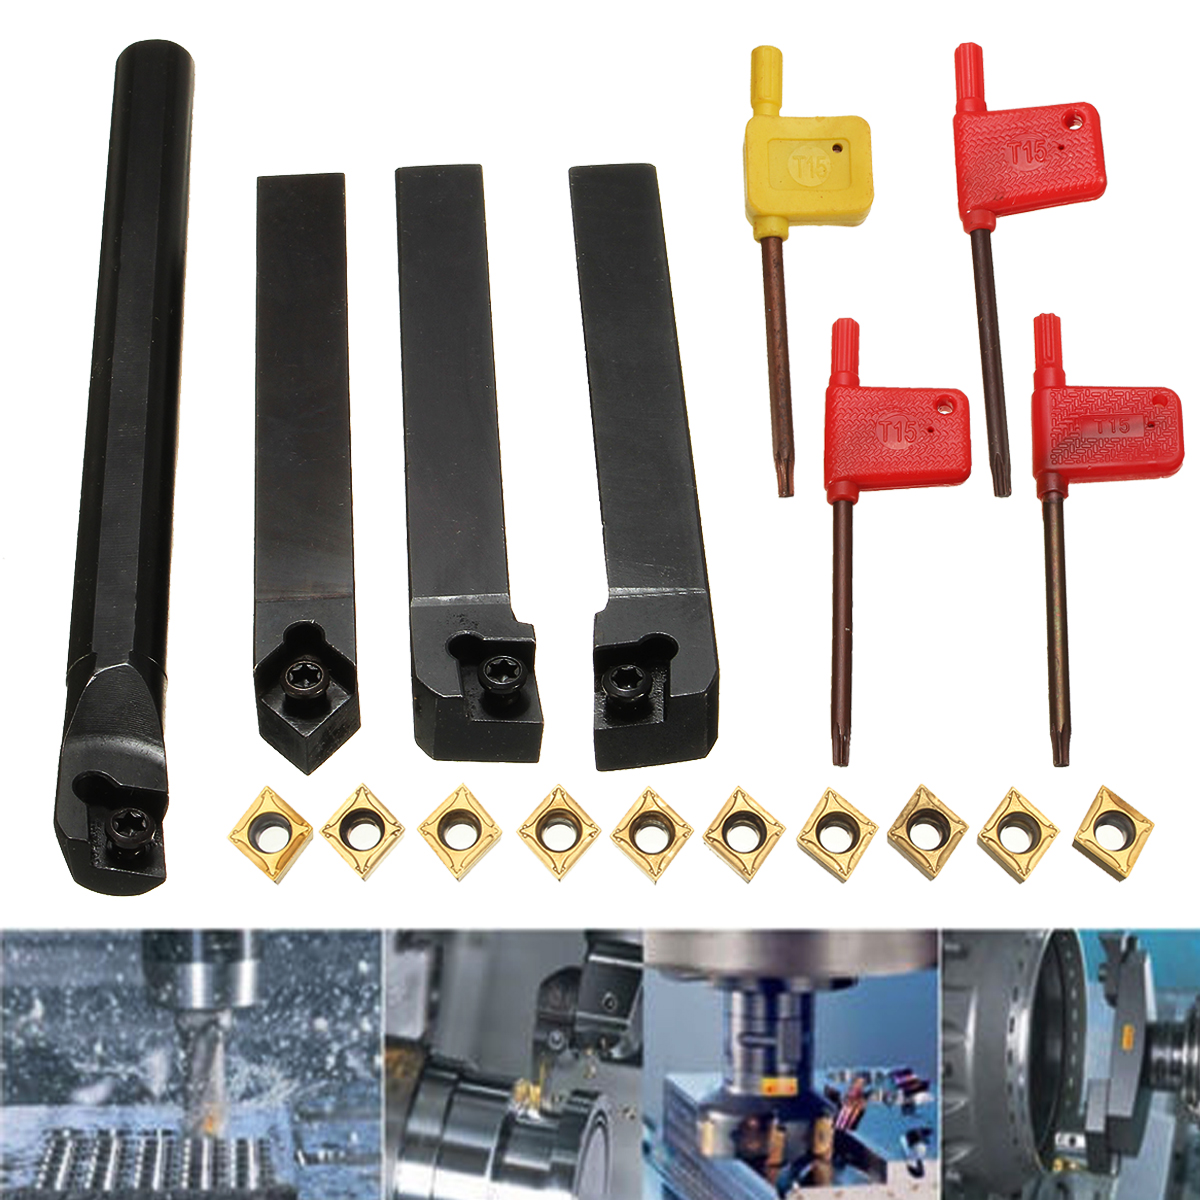 4pcs-SCLCRL-SCMCN-12mm-Lathe-Boring-Bar-Turning-Tool-Holder-With-10pcs-CCMT09T304-Carbide-Inserts-1088746-2